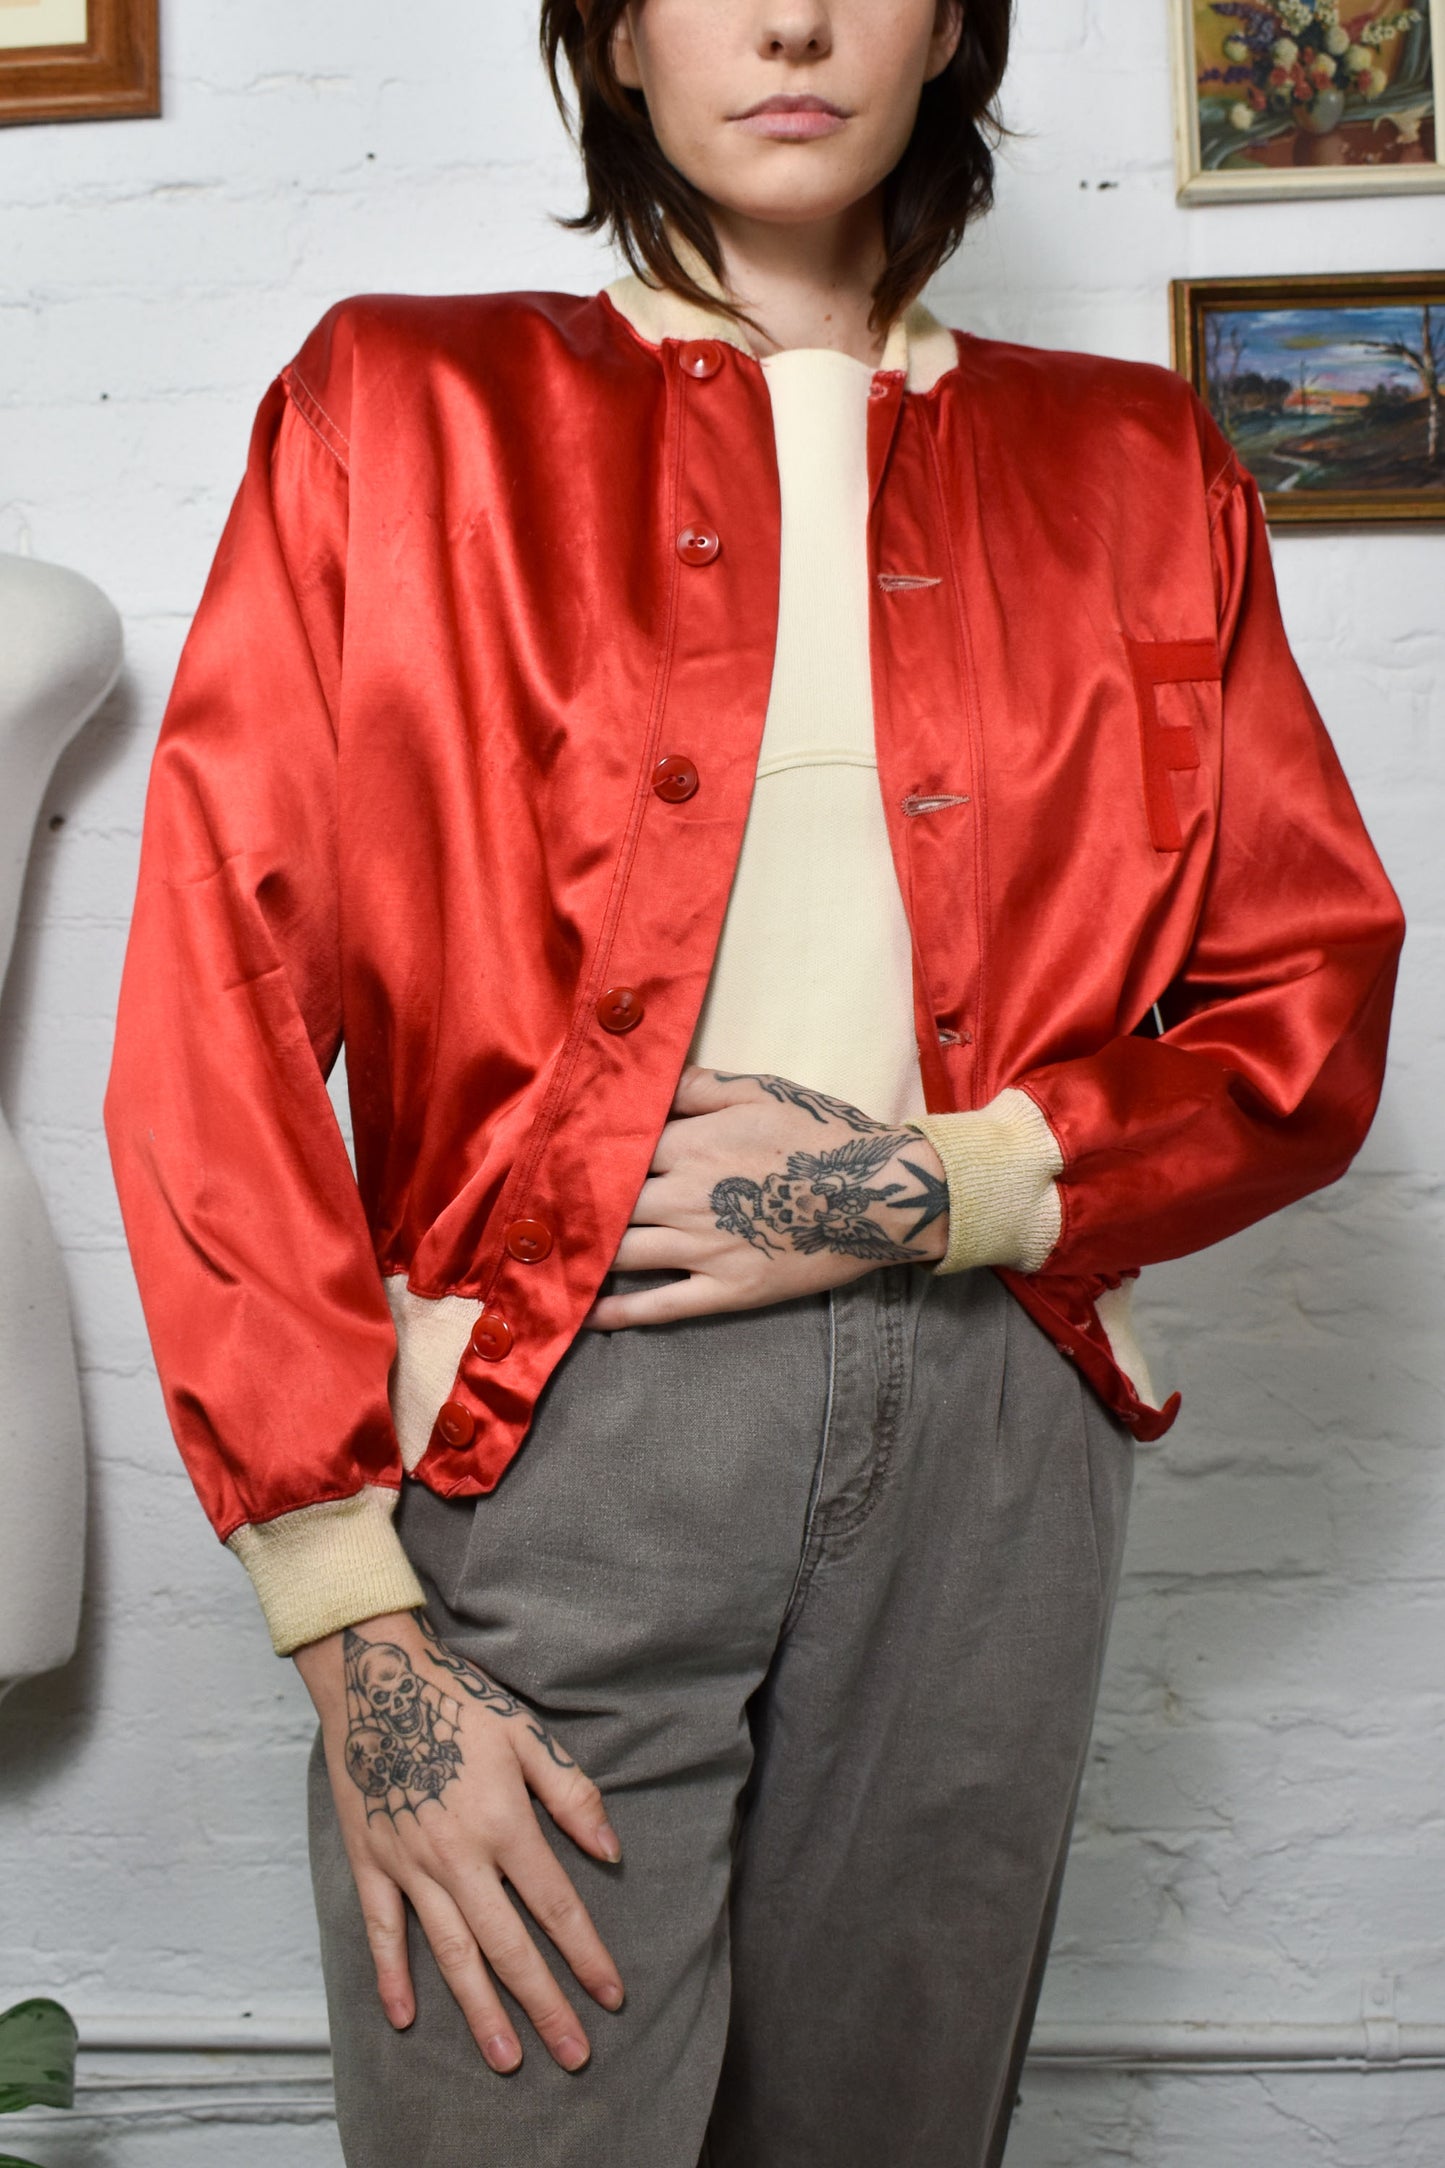 Vintage 40s/50s "Gold Smith" Red Satin Bomber Jacket